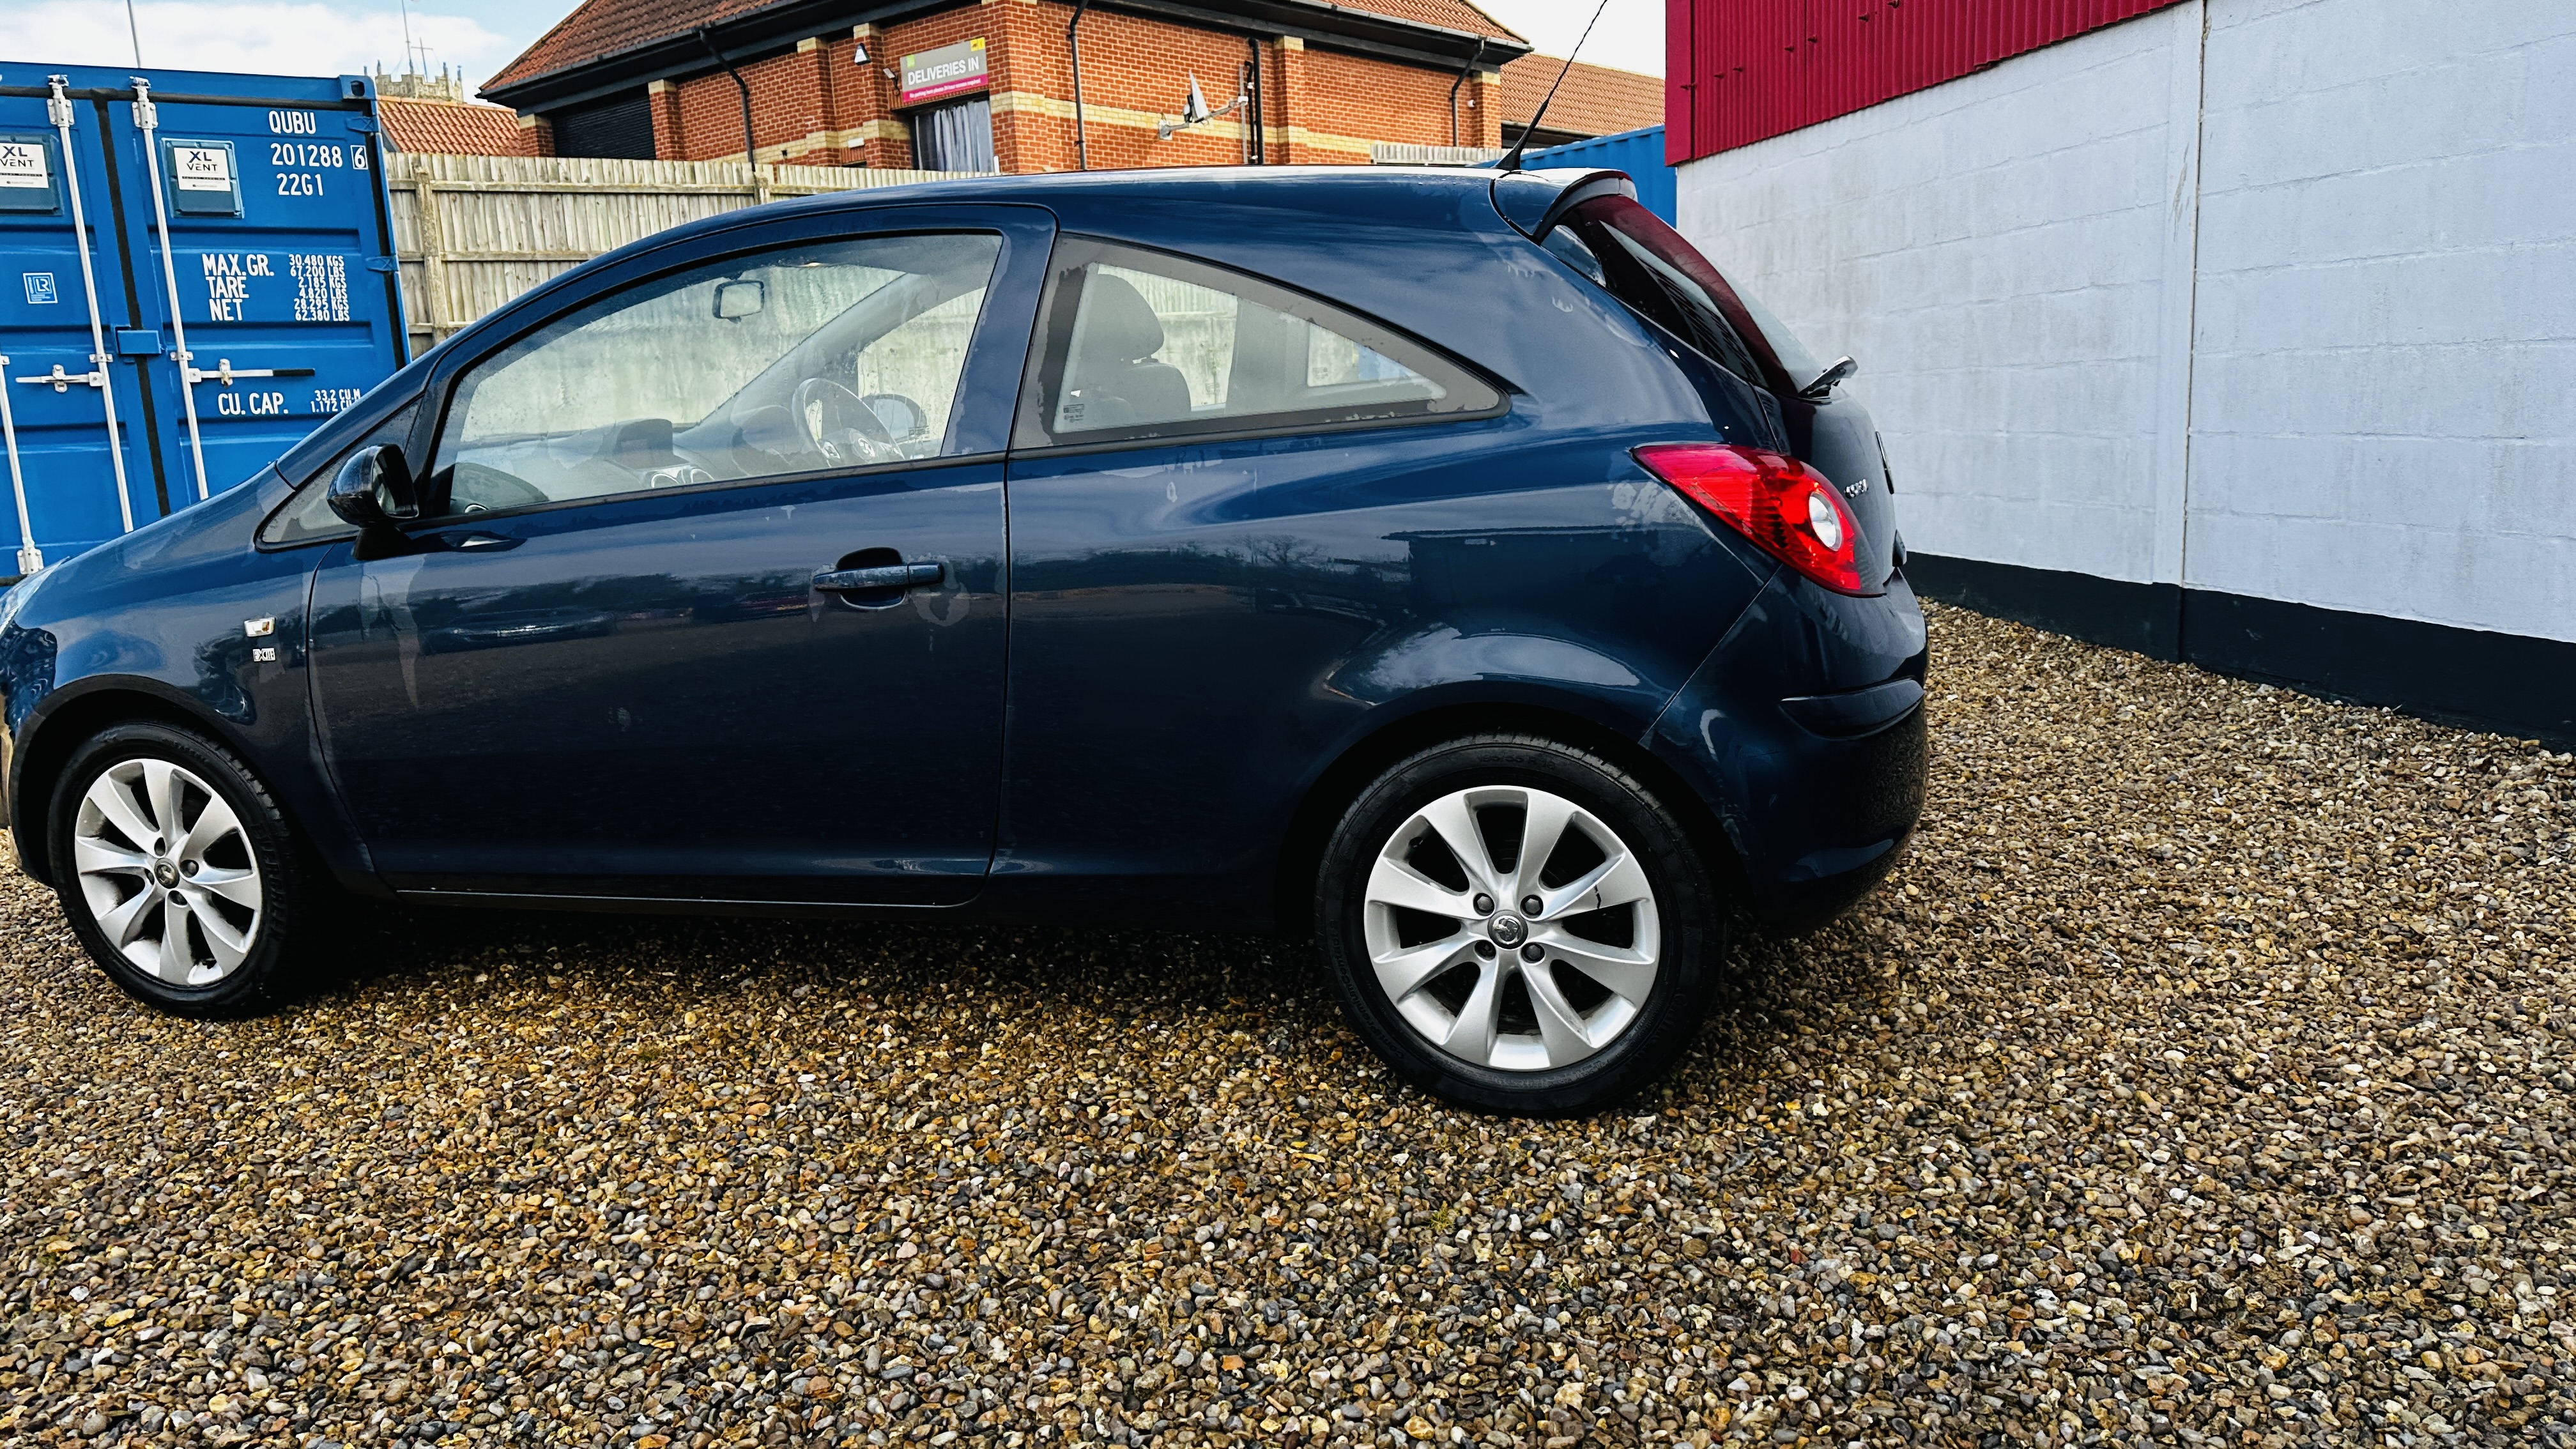 2014 VAUXHALL CORSA EXCITE AC. VRM: A064 NHJ. FIRST REGISTERED: 26/11/2014. 1229CC PETROL. - Image 5 of 19